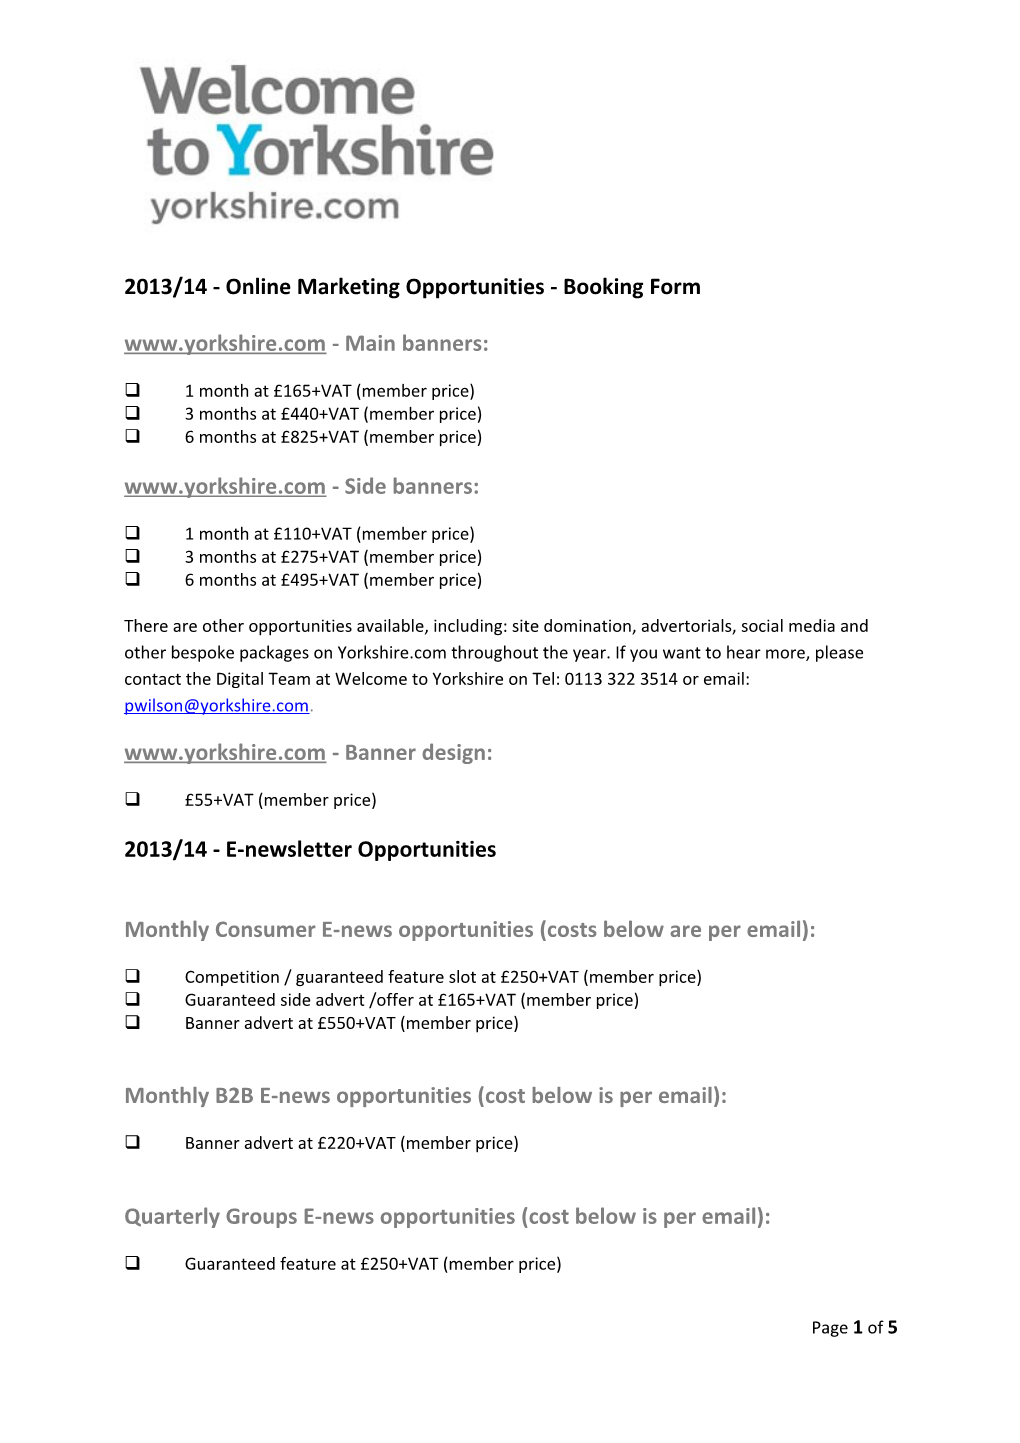 2013/14- Online Marketing Opportunities - Booking Form